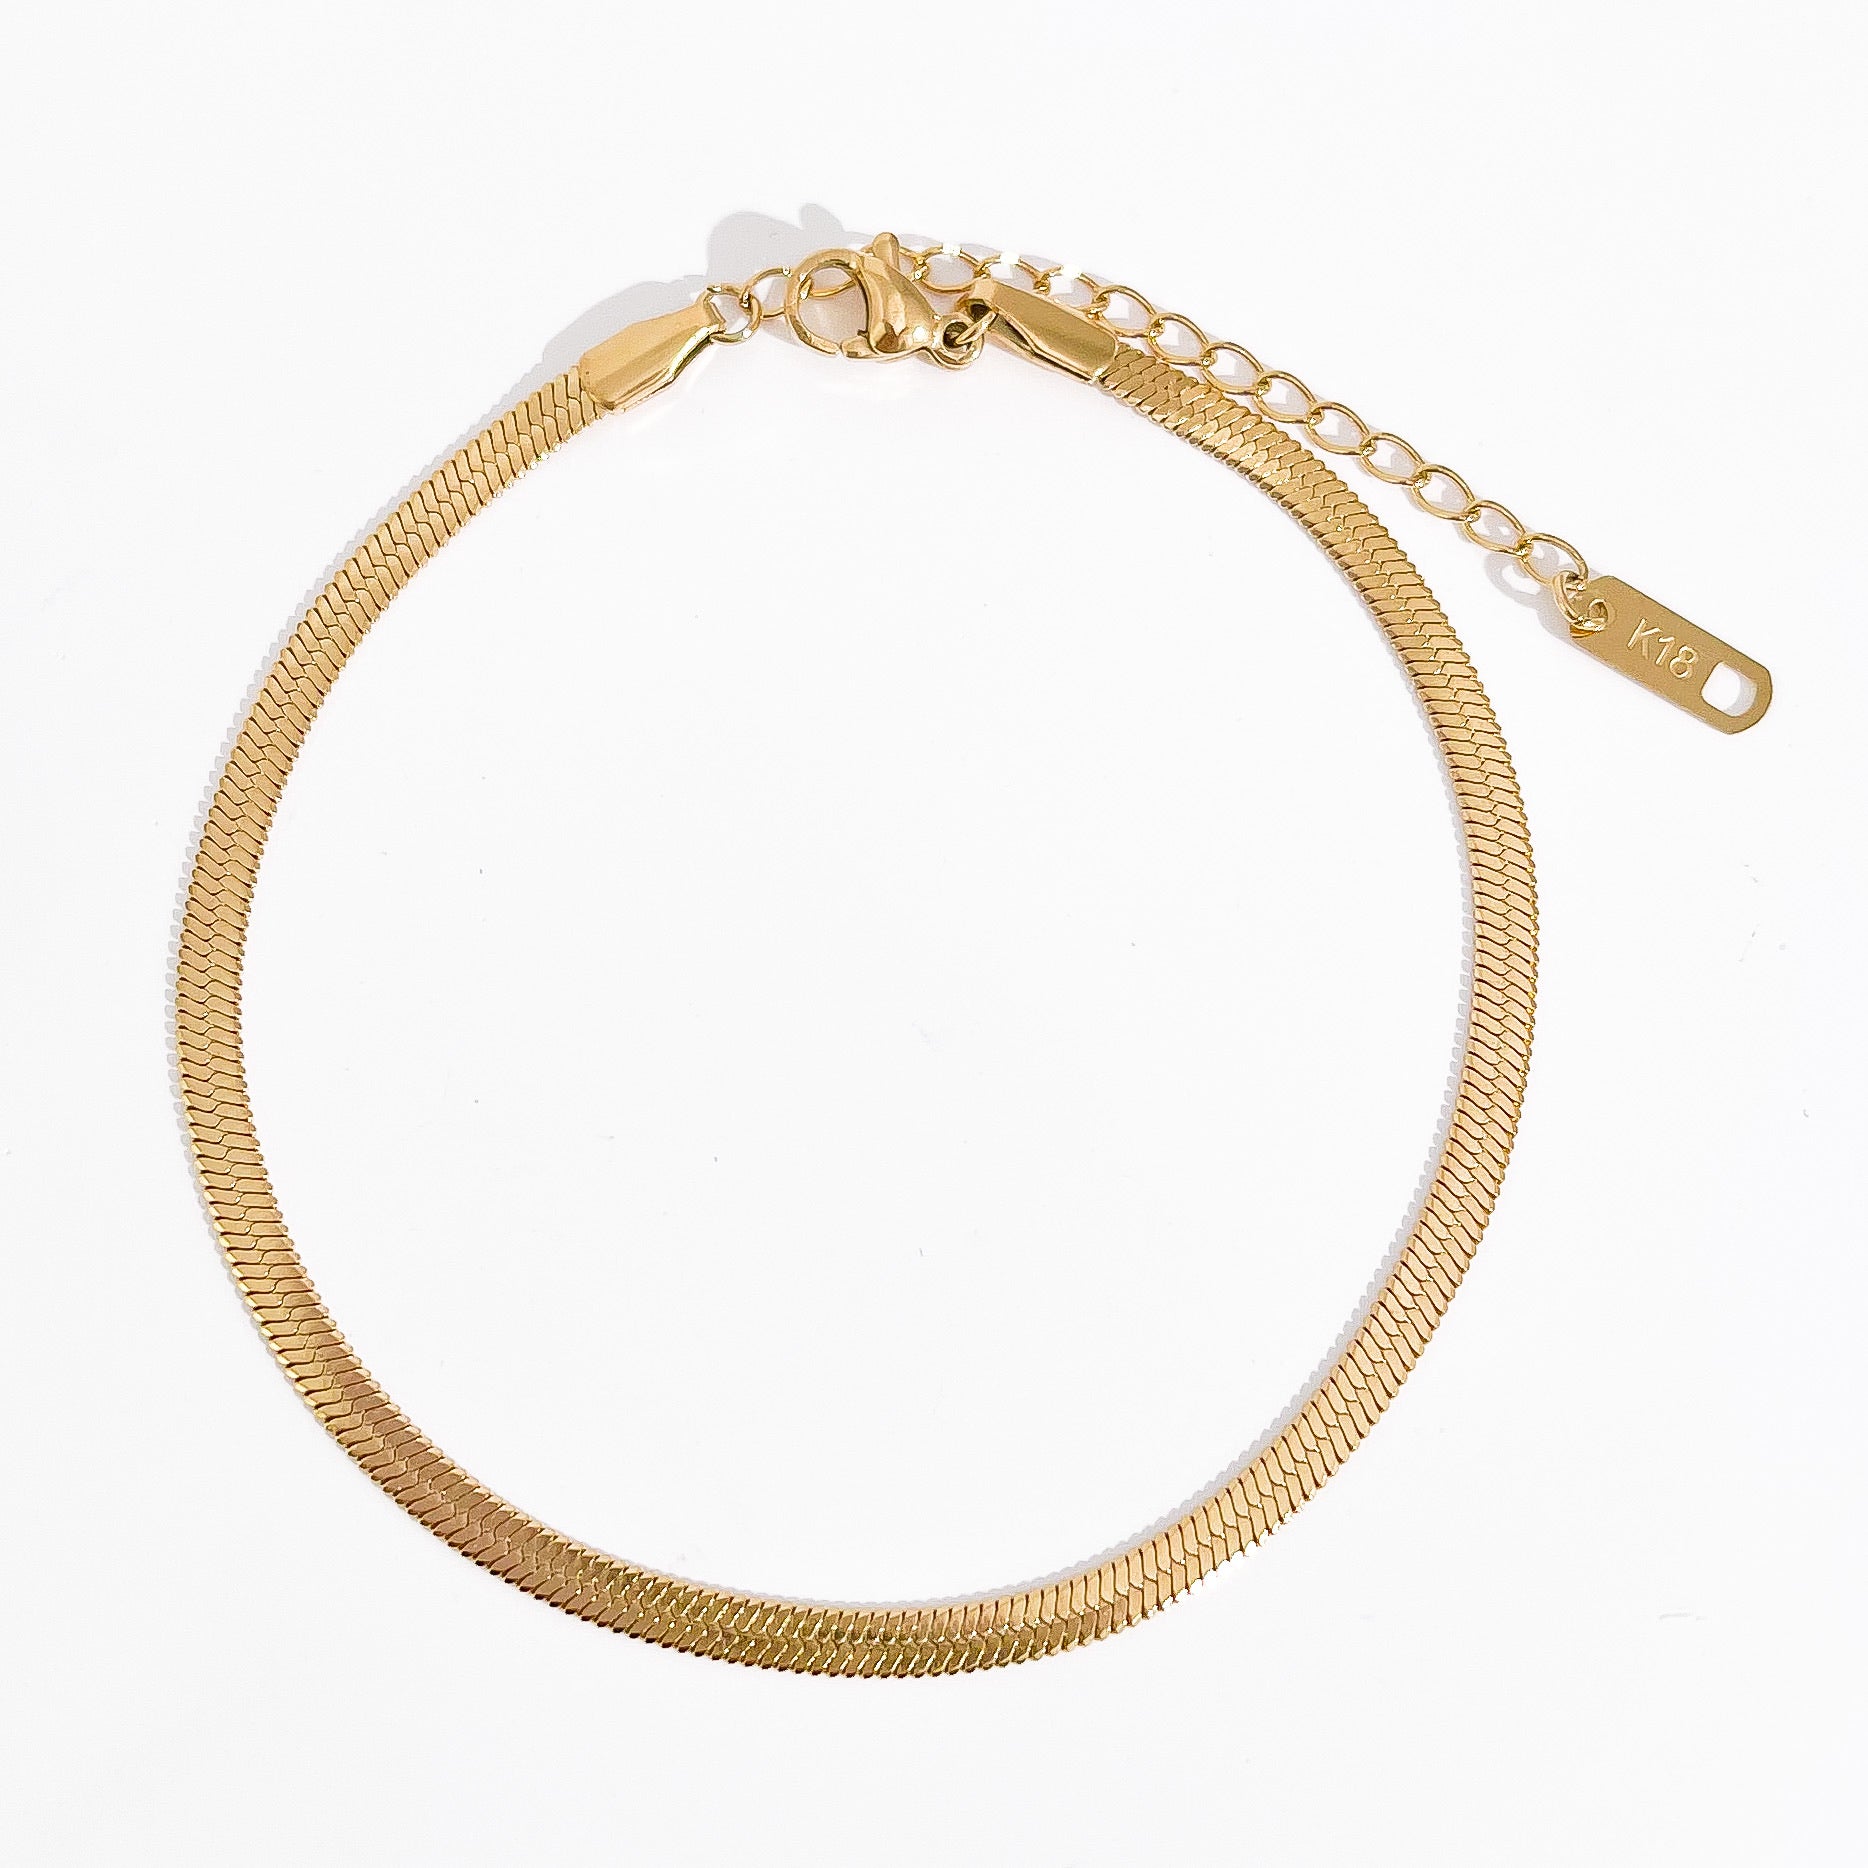 Herringbone Chain Anklet in Gold - Flaire & Co.